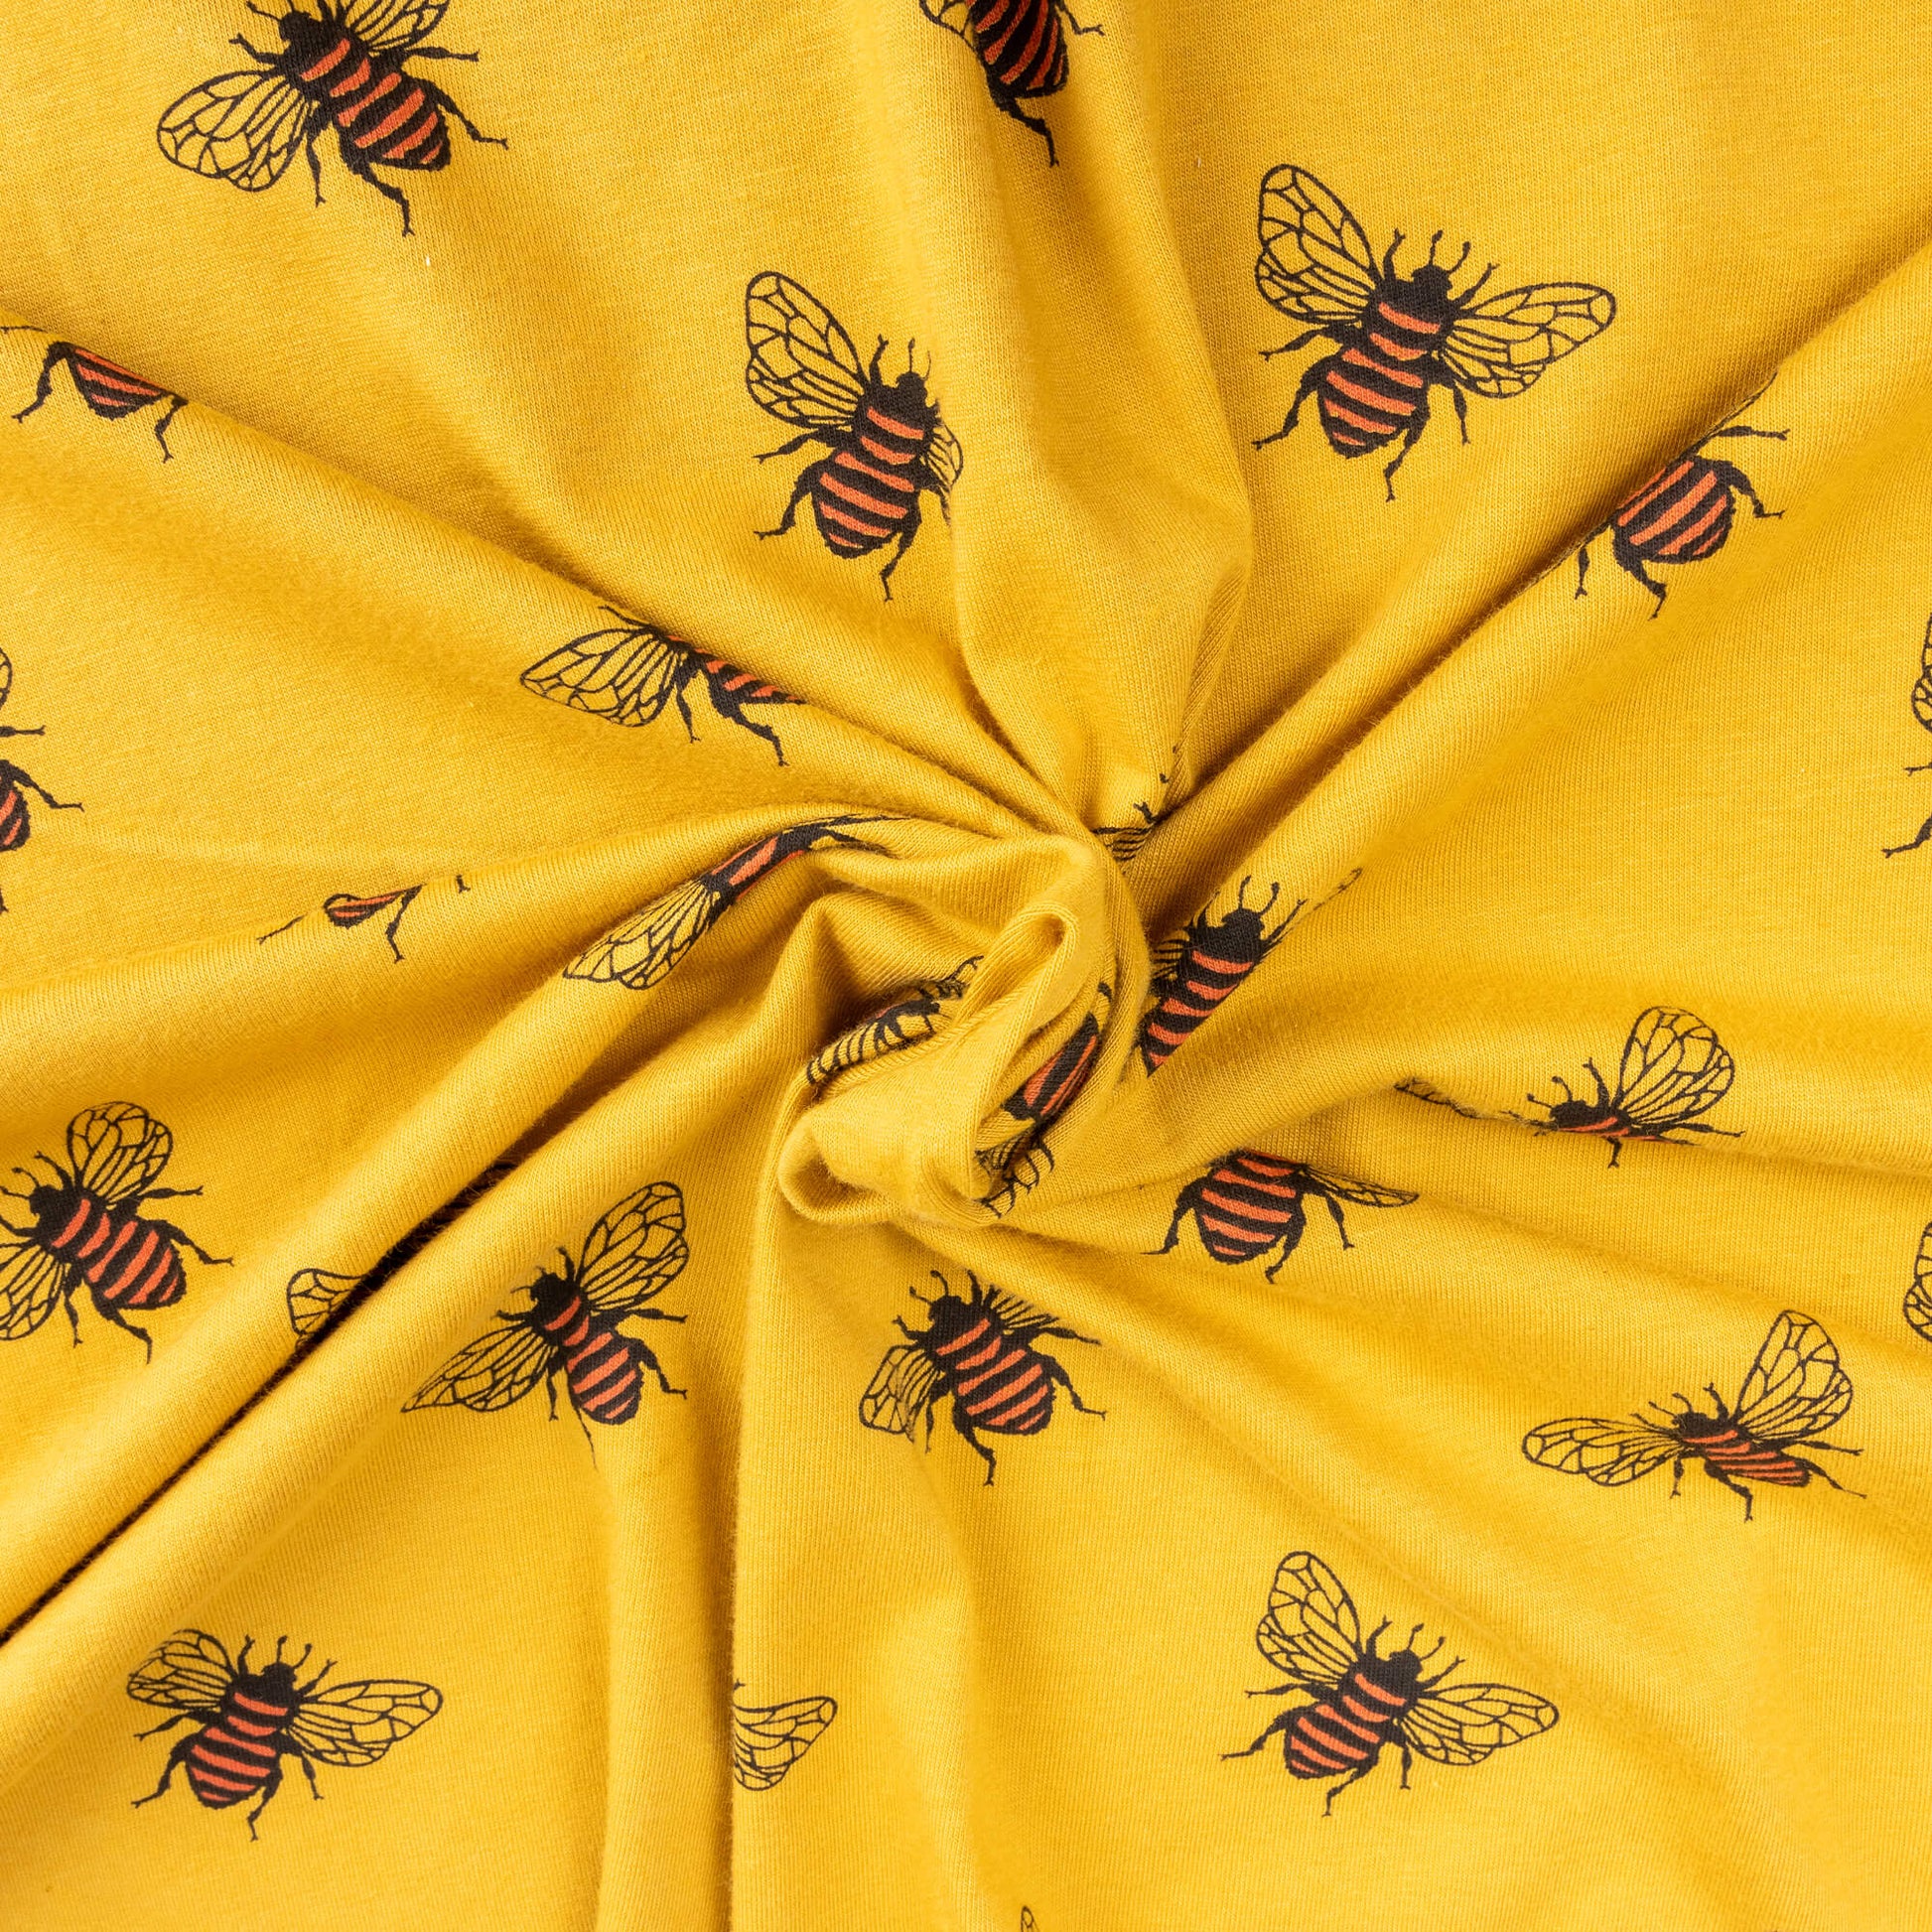 close up a twisted portion of mustard gold coloured fabric showing bees with black and orange stripes and delicate wings